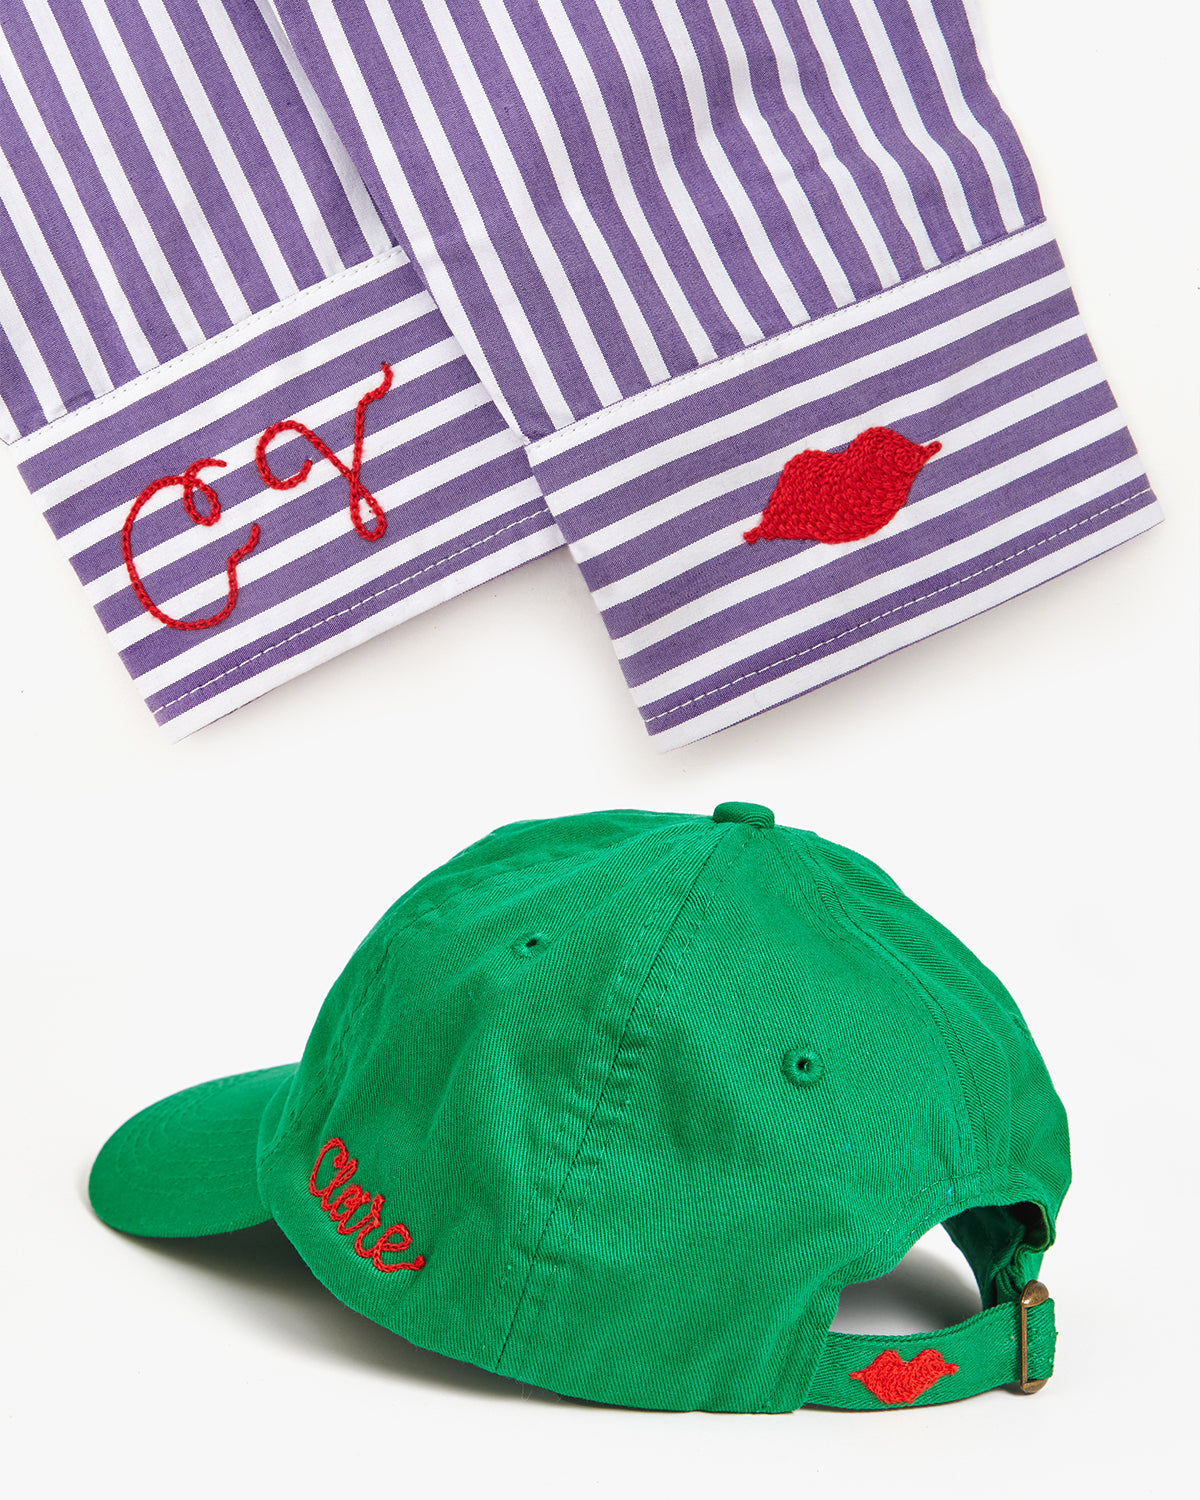 Striped shirt with embroidery monogram on both cuffs and a Baseball Hat with embroidery on the side and back. 